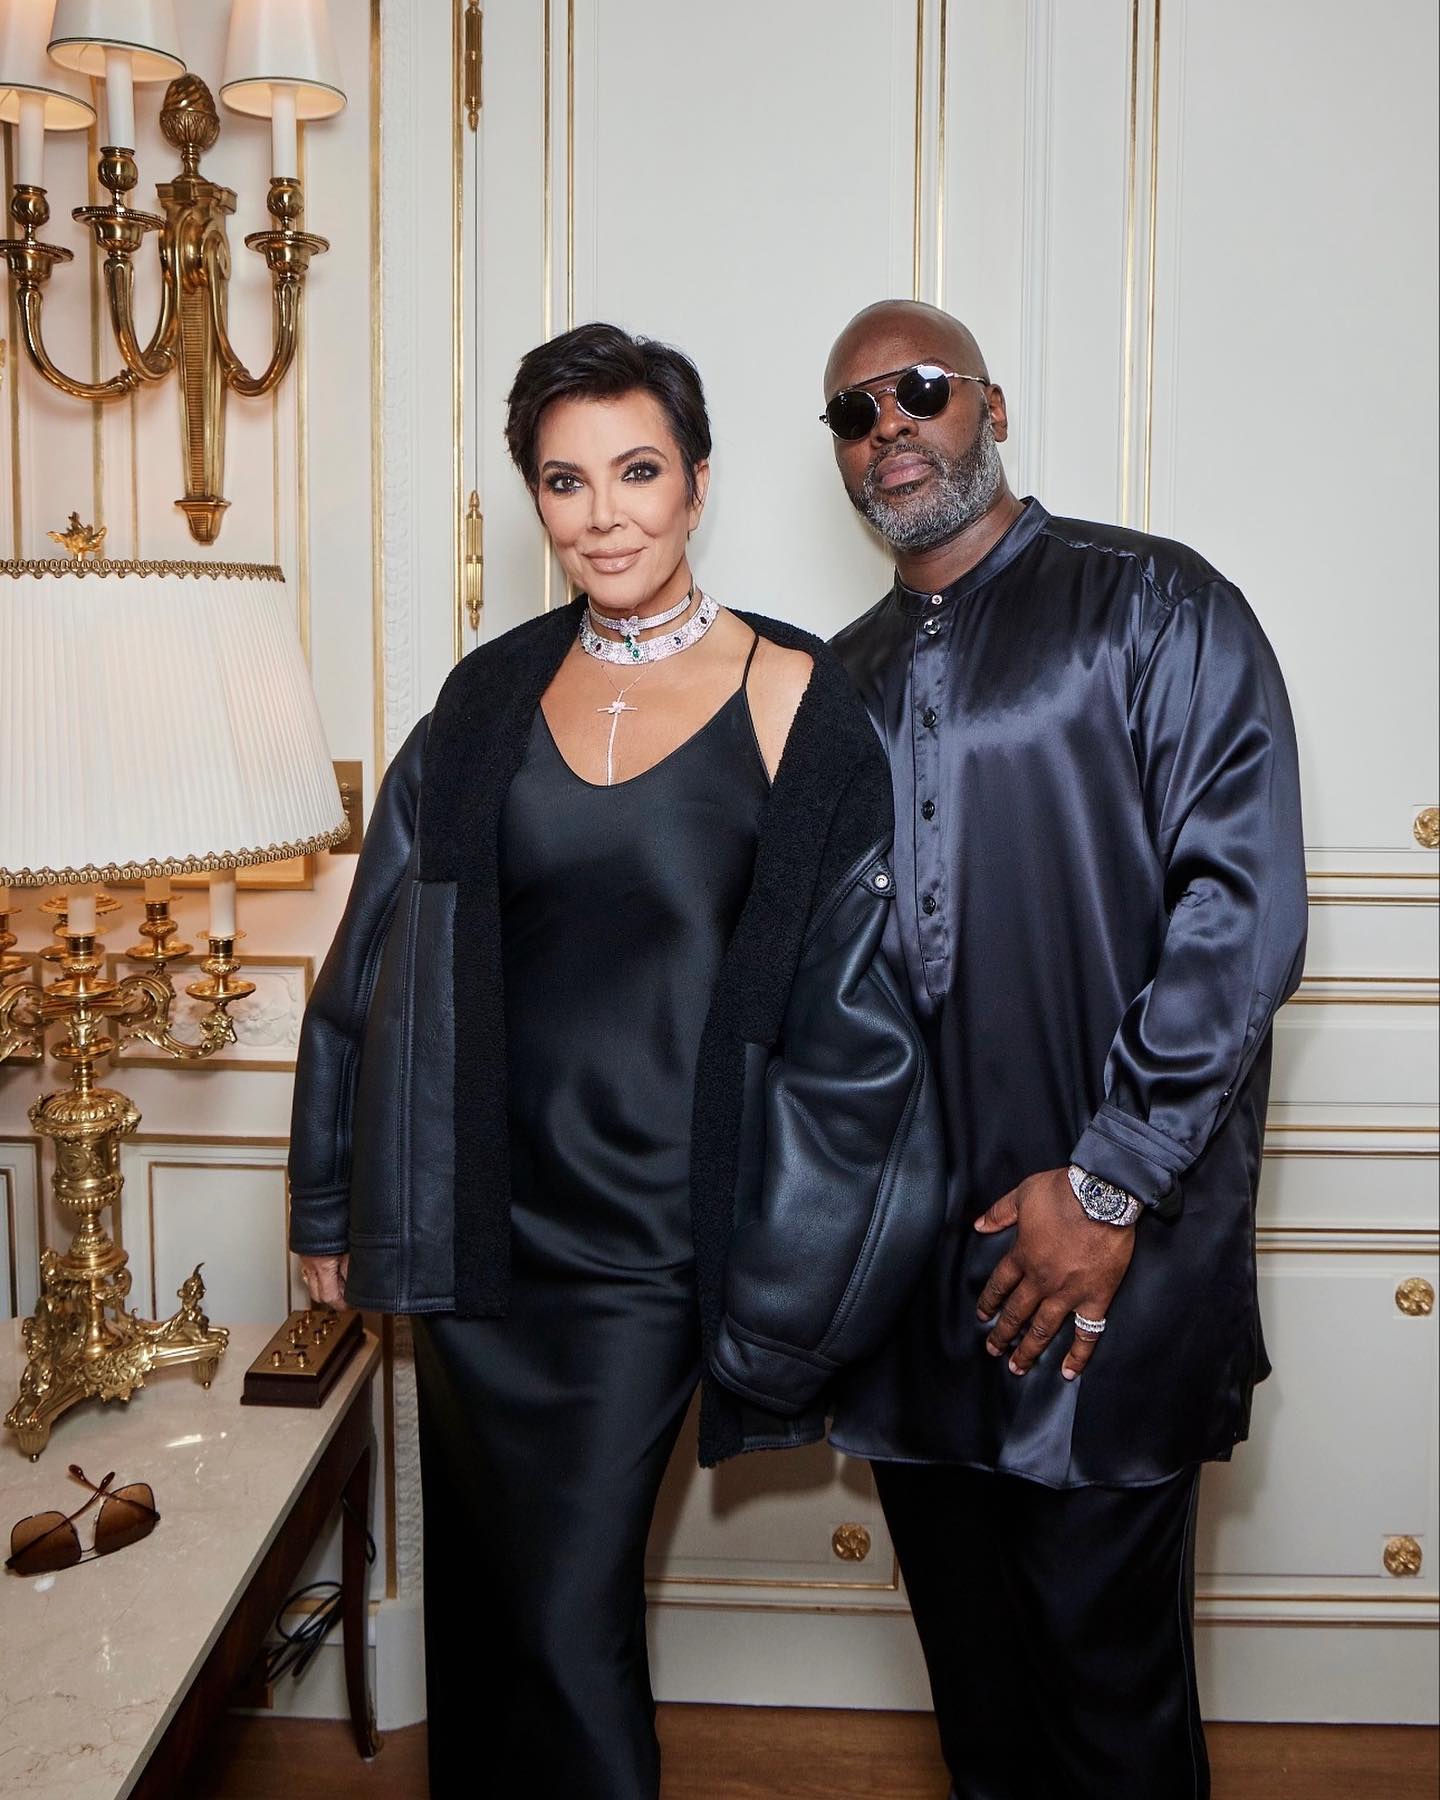 Corey has been dating Kris Jenner for a decade